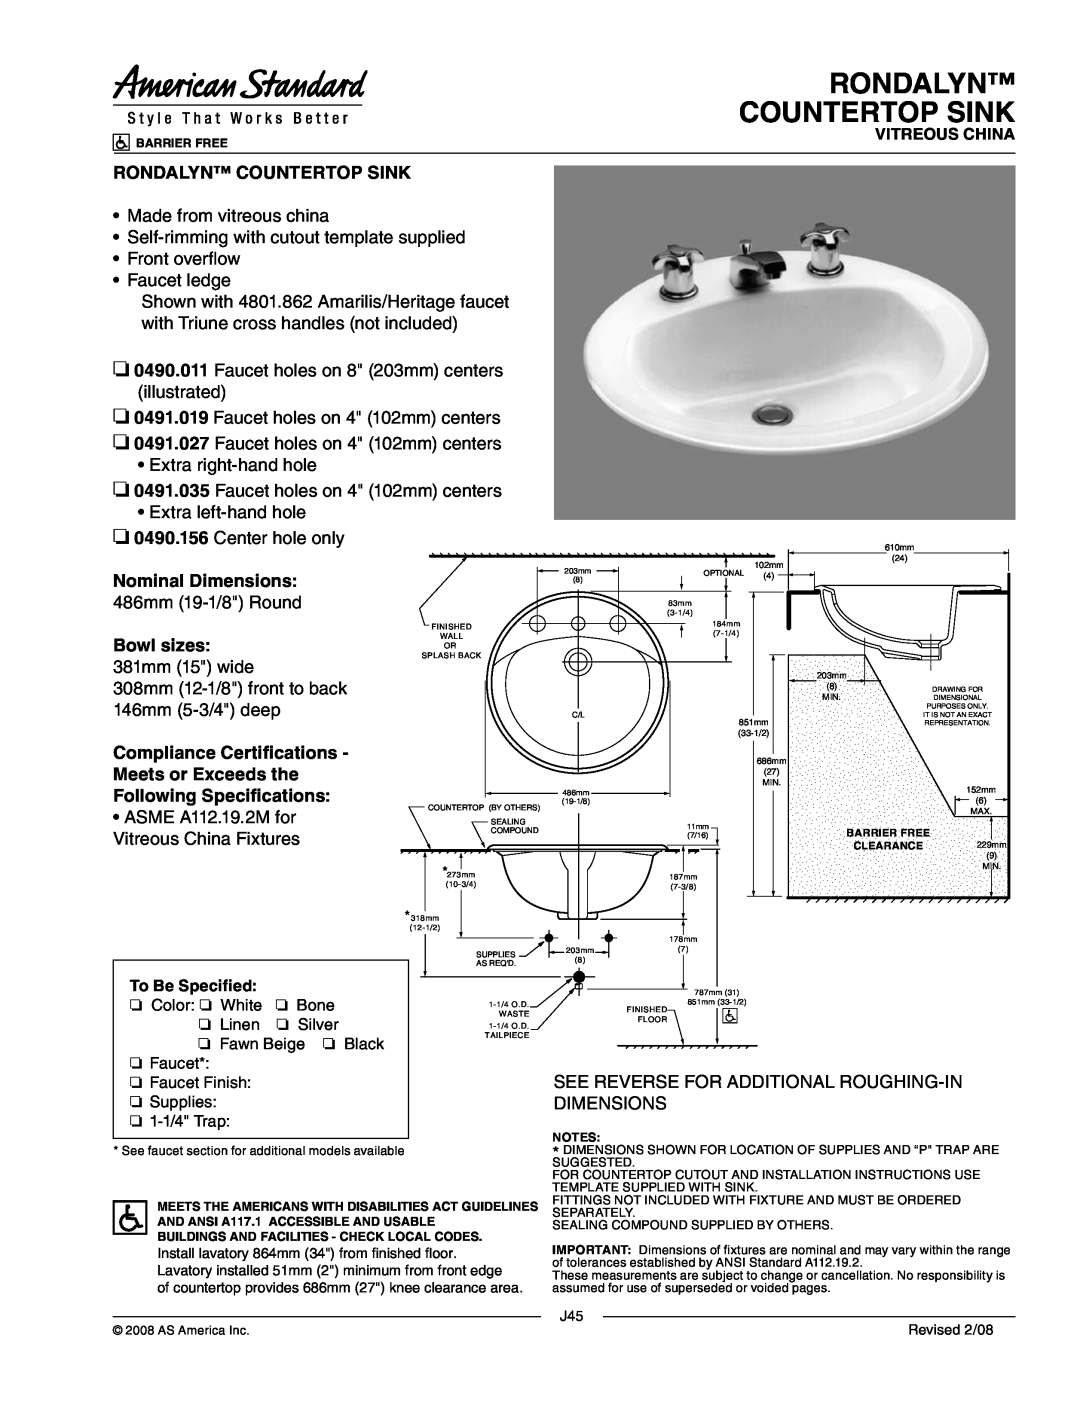 American Standard 0490.027 dimensions Rondalyn Countertop Sink, Nominal Dimensions, Bowl sizes, Compliance Certifications 